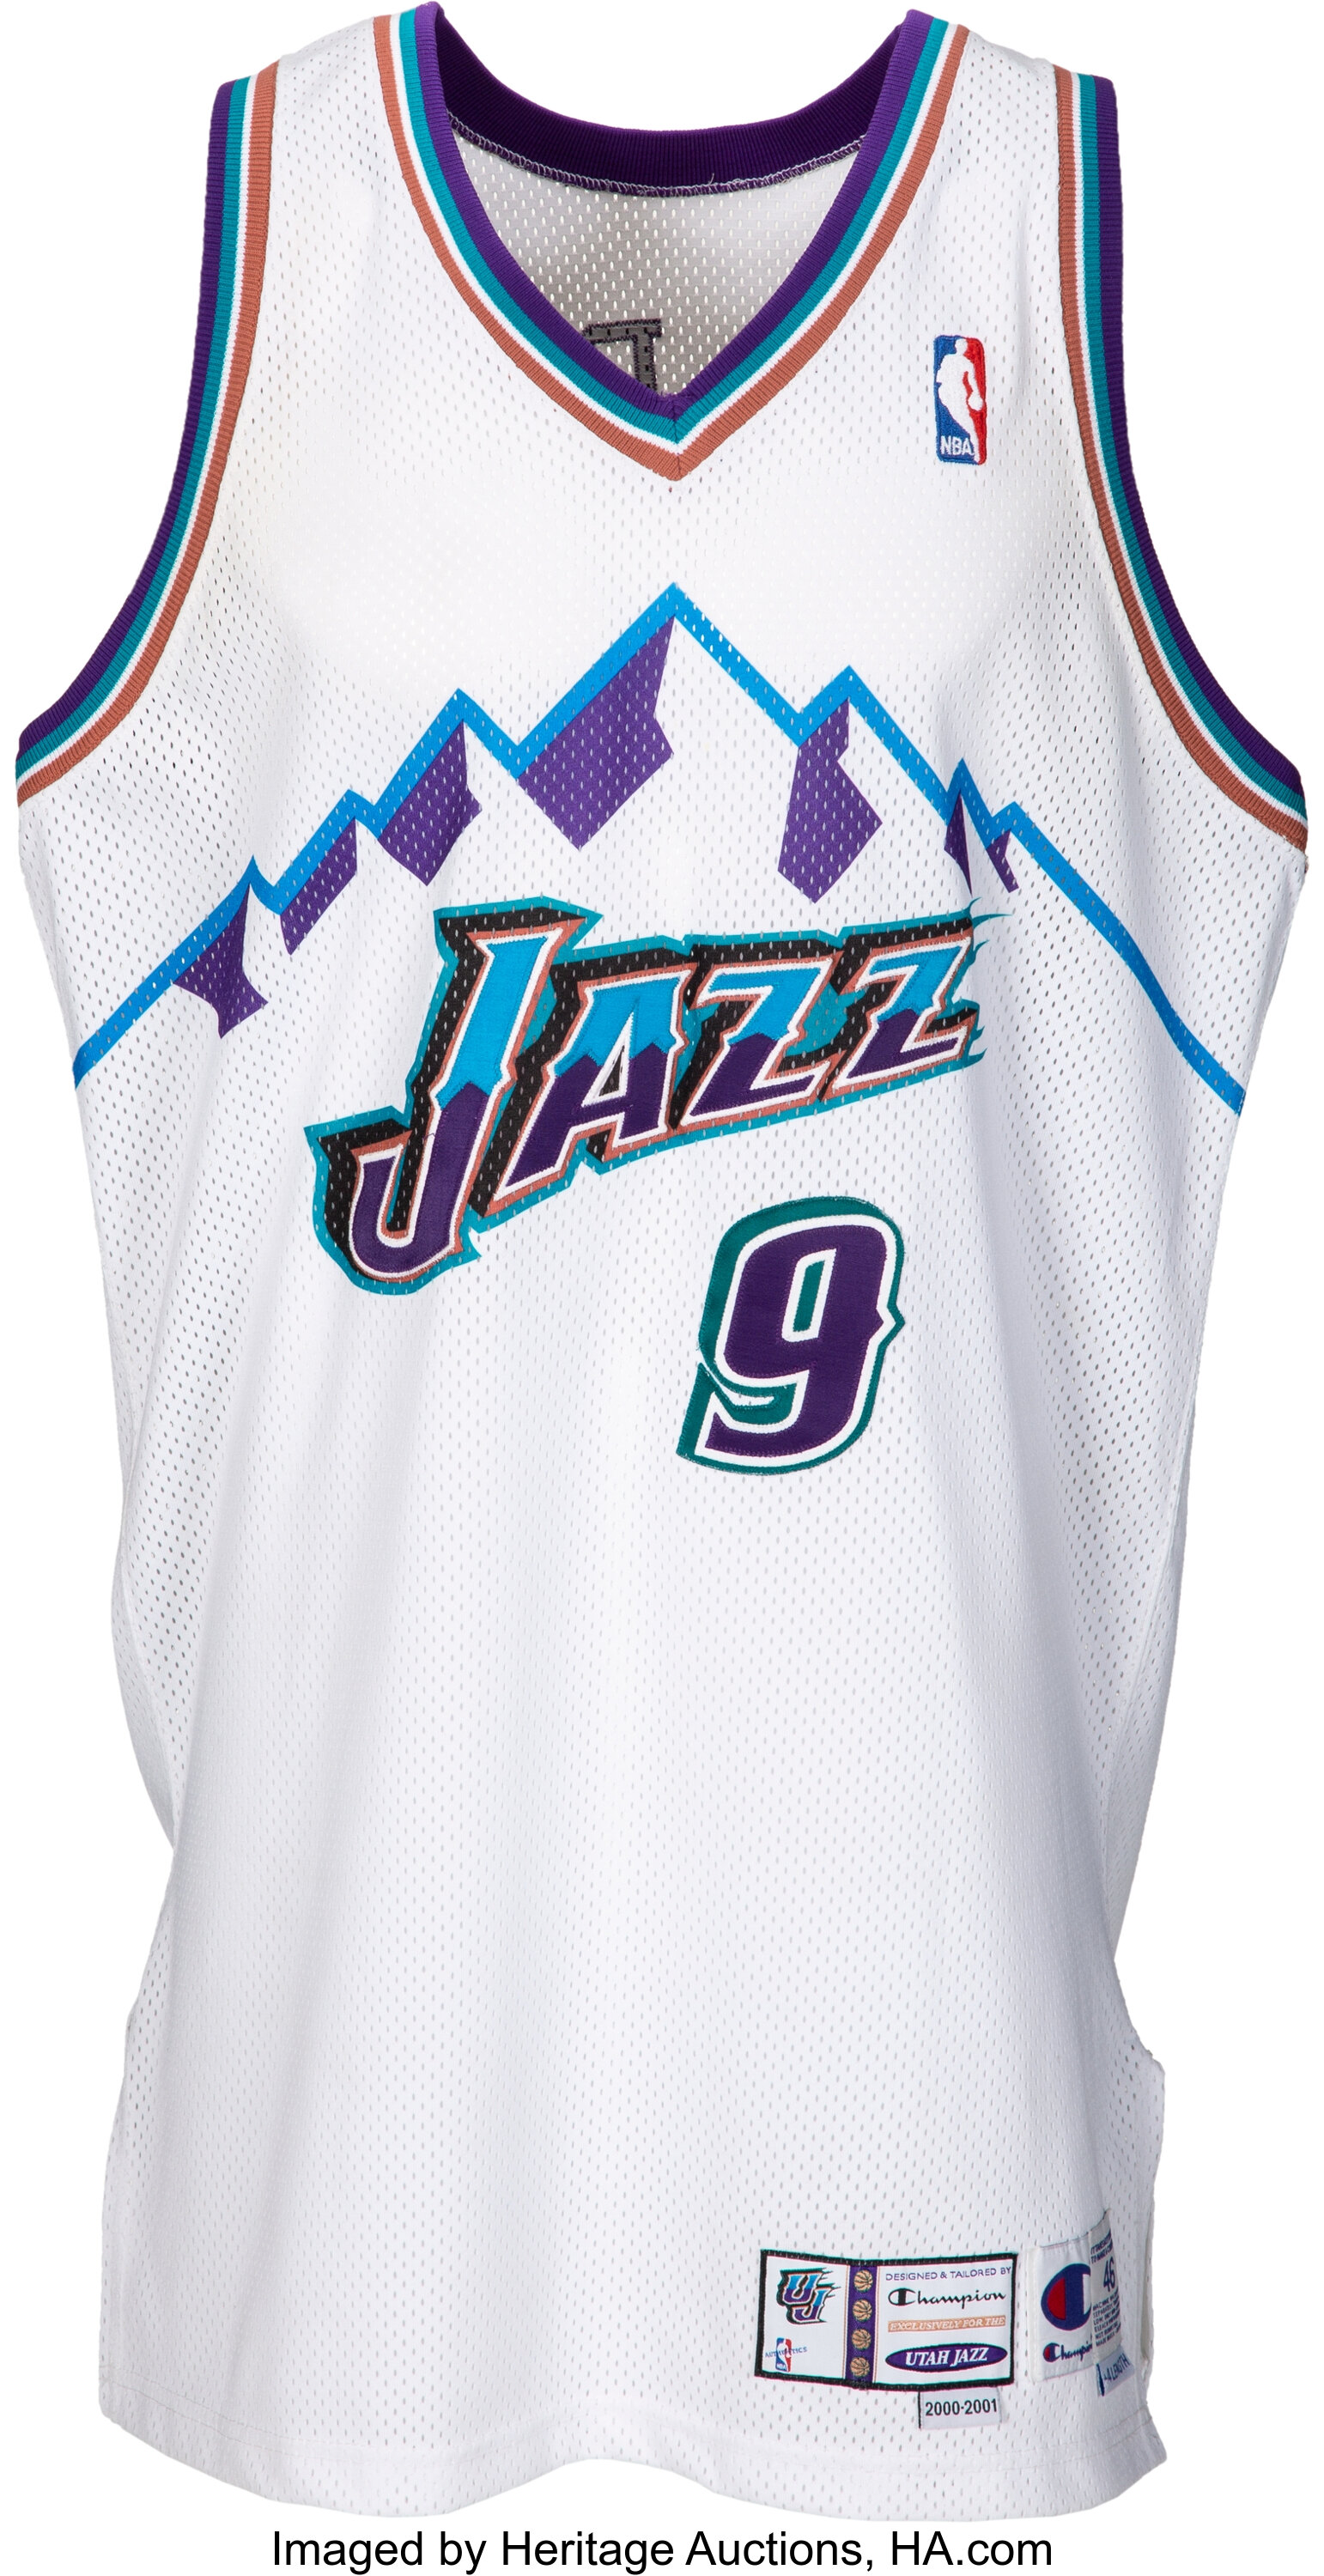 Utah Jazz reveal which kits they'll rock for each game in 2018-19